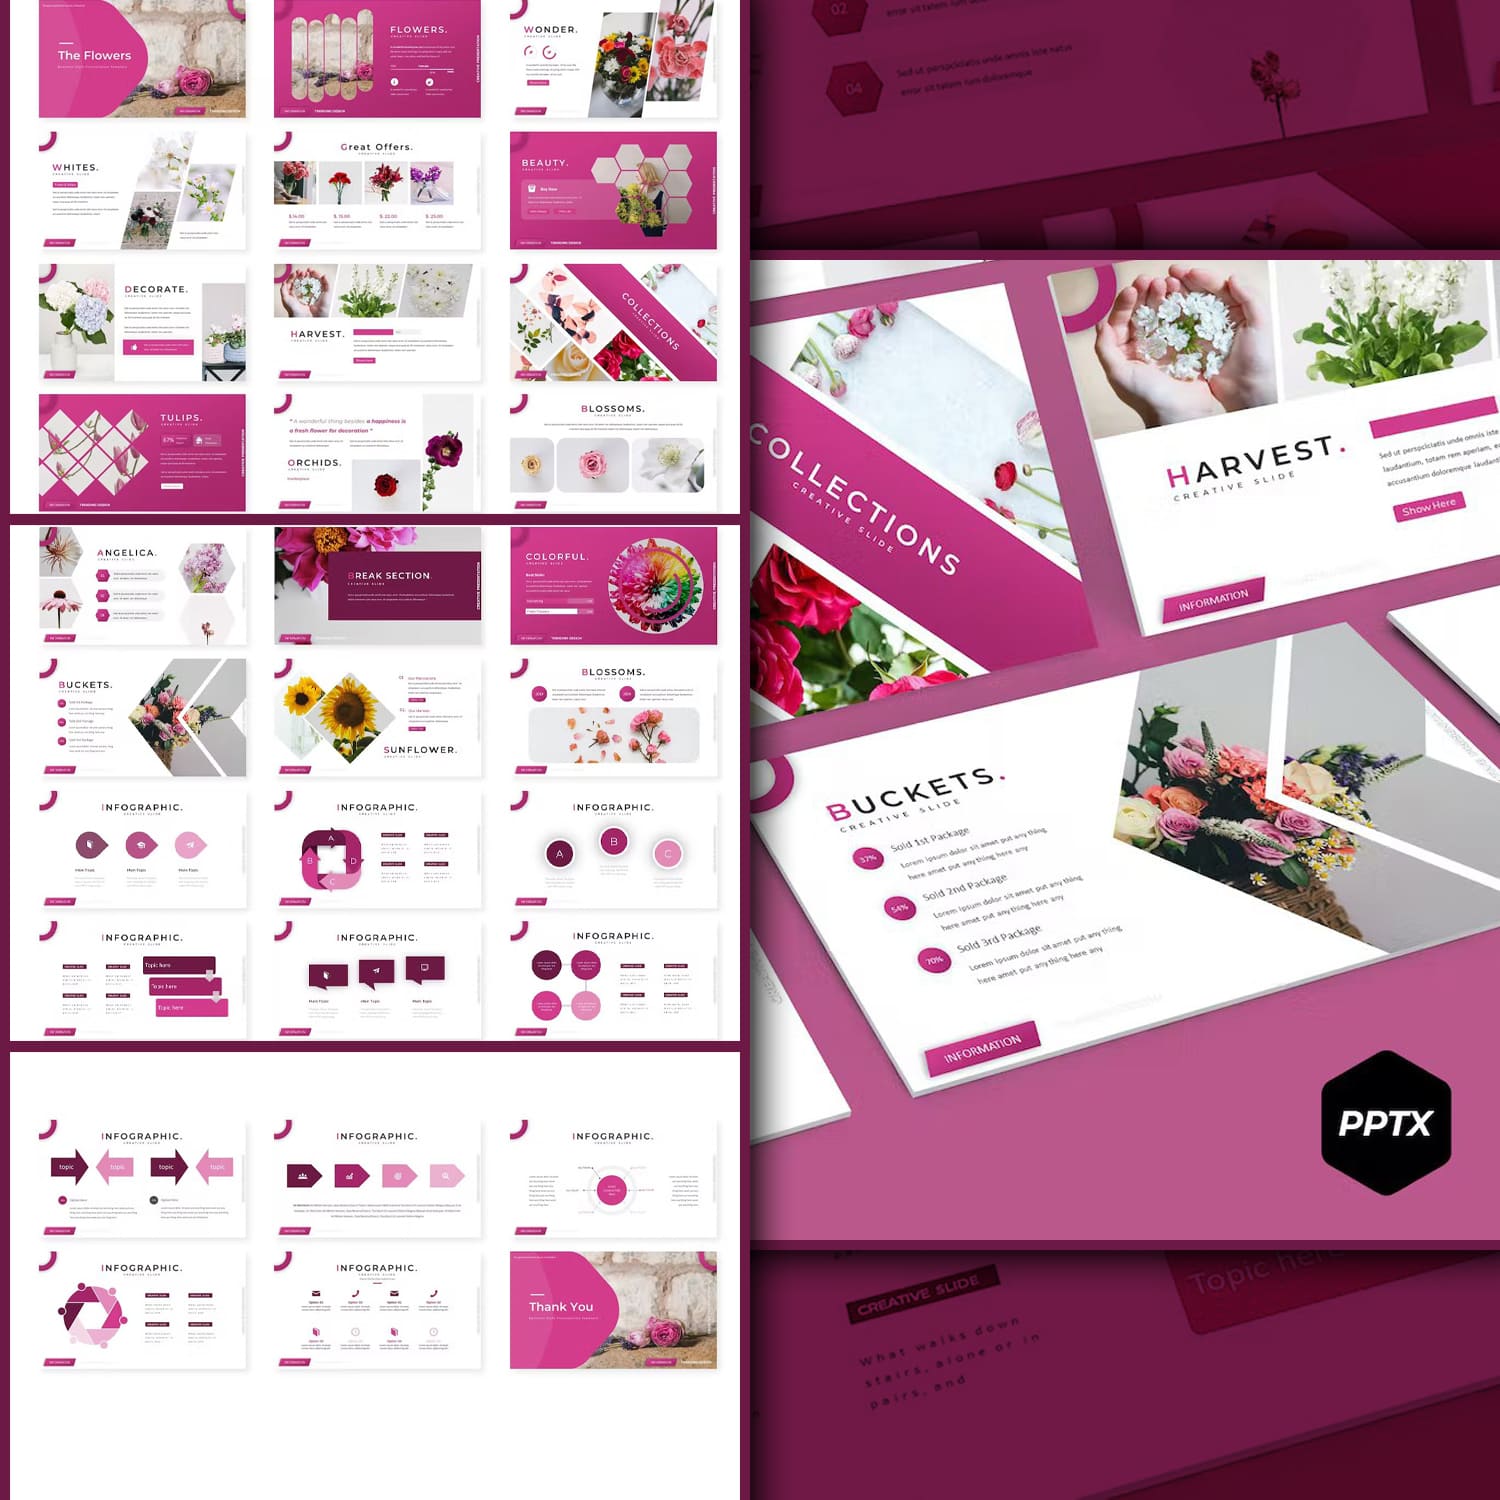 A selection of images of beautiful presentation template slides in pink and white colors.